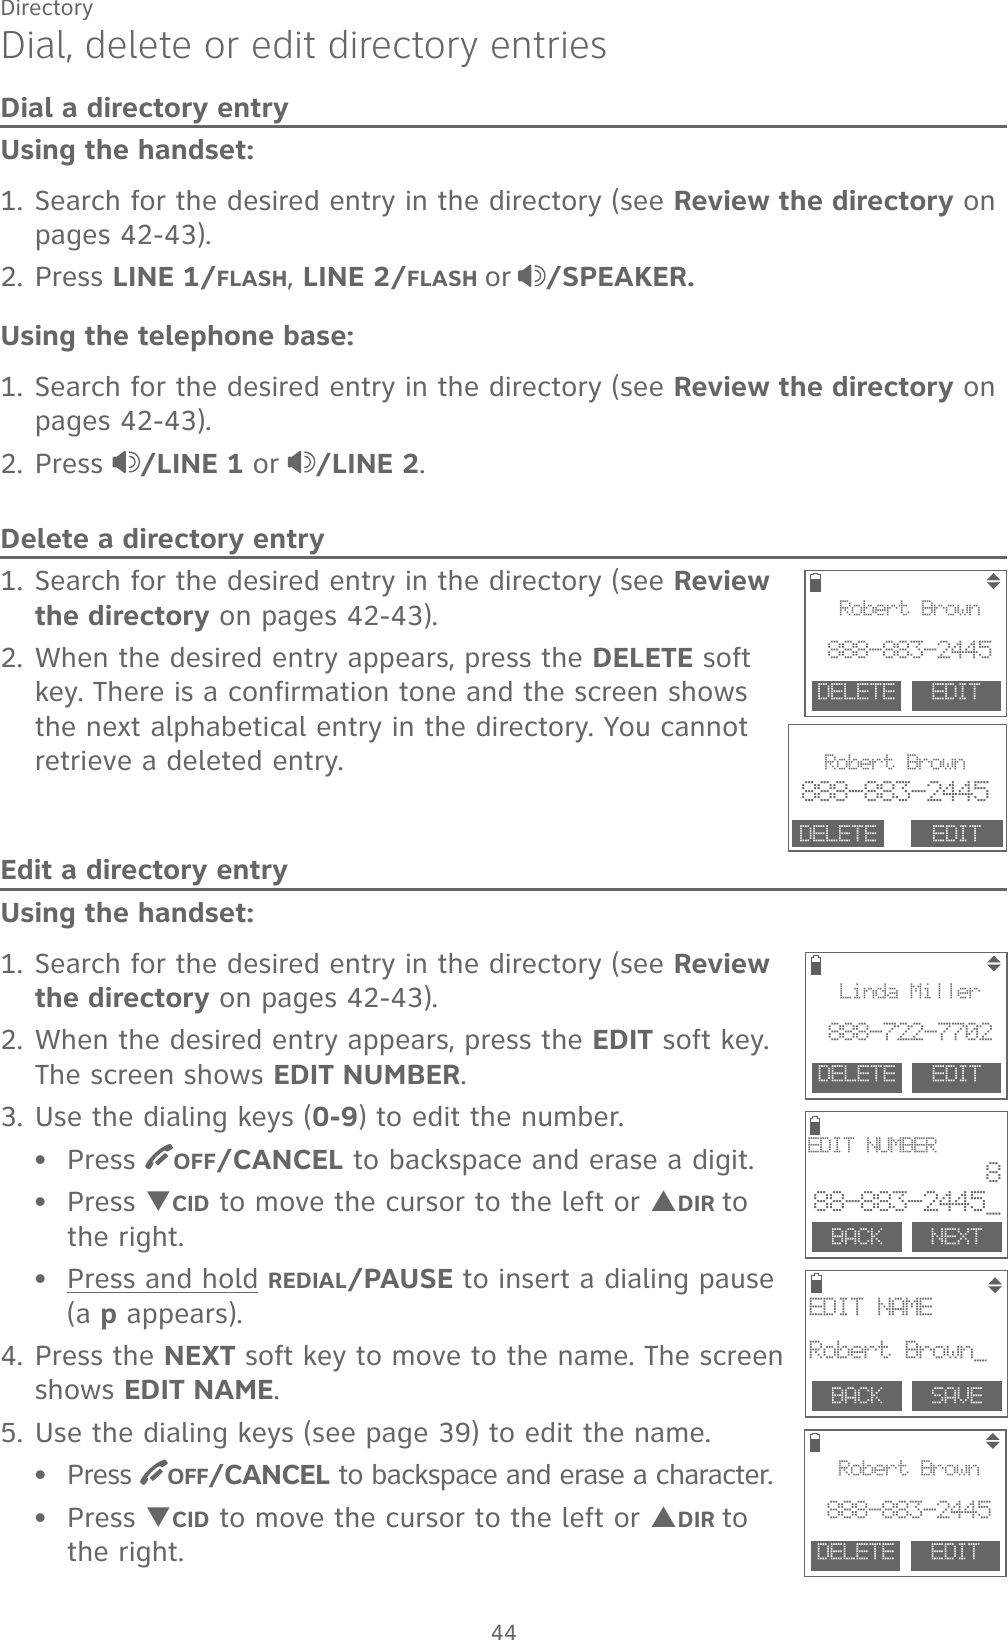 44DirectoryDial, delete or edit directory entriesDial a directory entryUsing the handset:1. Search for the desired entry in the directory (see Review the directory on pages 42-43).2. Press LINE 1/FLASH, LINE 2/FLASH or /SPEAKER.Using the telephone base:1. Search for the desired entry in the directory (see Review the directory on pages 42-43).2. Press  /LINE 1 or /LINE 2.Delete a directory entry1. Search for the desired entry in the directory (see Review the directory on pages 42-43).2. When the desired entry appears, press the DELETE soft key. There is a confirmation tone and the screen shows the next alphabetical entry in the directory. You cannot retrieve a deleted entry.Edit a directory entryUsing the handset:1. Search for the desired entry in the directory (see Review the directory on pages 42-43).2. When the desired entry appears, press the EDIT soft key. The screen shows EDIT NUMBER.3. Use the dialing keys (0-9) to edit the number.Press  OFF/CANCEL to backspace and erase a digit.Press TCID to move the cursor to the left or SDIR to  the right.Press and hold REDIAL/PAUSE to insert a dialing pause (a p appears).4. Press the NEXT soft key to move to the name. The screen shows EDIT NAME.5. Use the dialing keys (see page 39) to edit the name.Press  OFF/CANCEL to backspace and erase a character.Press TCID to move the cursor to the left or SDIR to  the right.•••••                                DELETE  EDITRobert Brown888-883-2445DELETE  EDITLinda Miller888-722-7702BACK    SAVEEDIT NAMERobert Brown_BACK    NEXTEDIT NUMBER888-883-2445_                               Robert Brown888-883-2445DELETE EDITDELETE  EDITRobert Brown888-883-2445